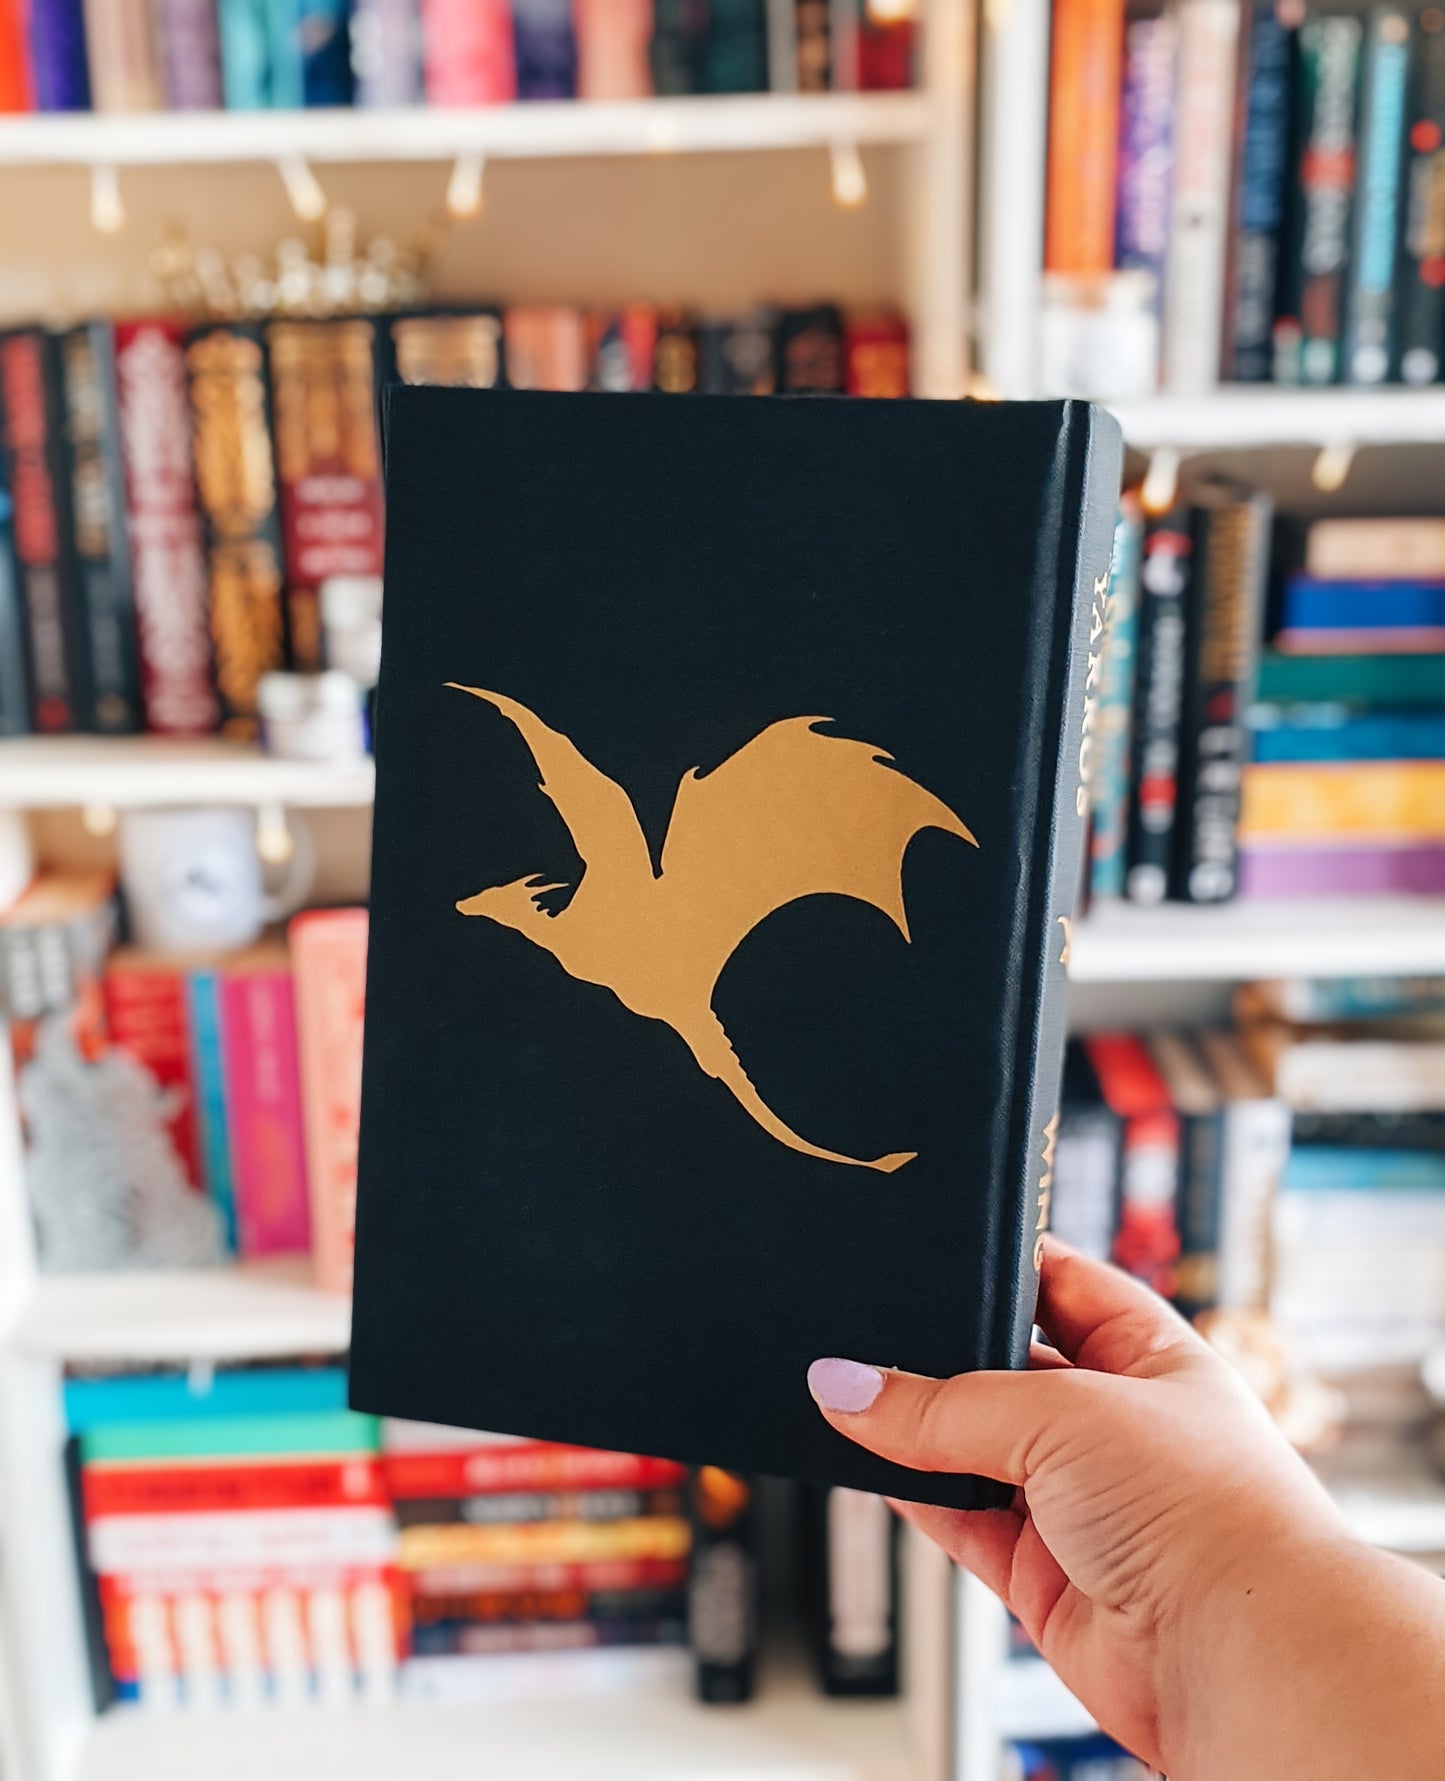 Dragon gold vinyl decal for book covers (book NOT included)